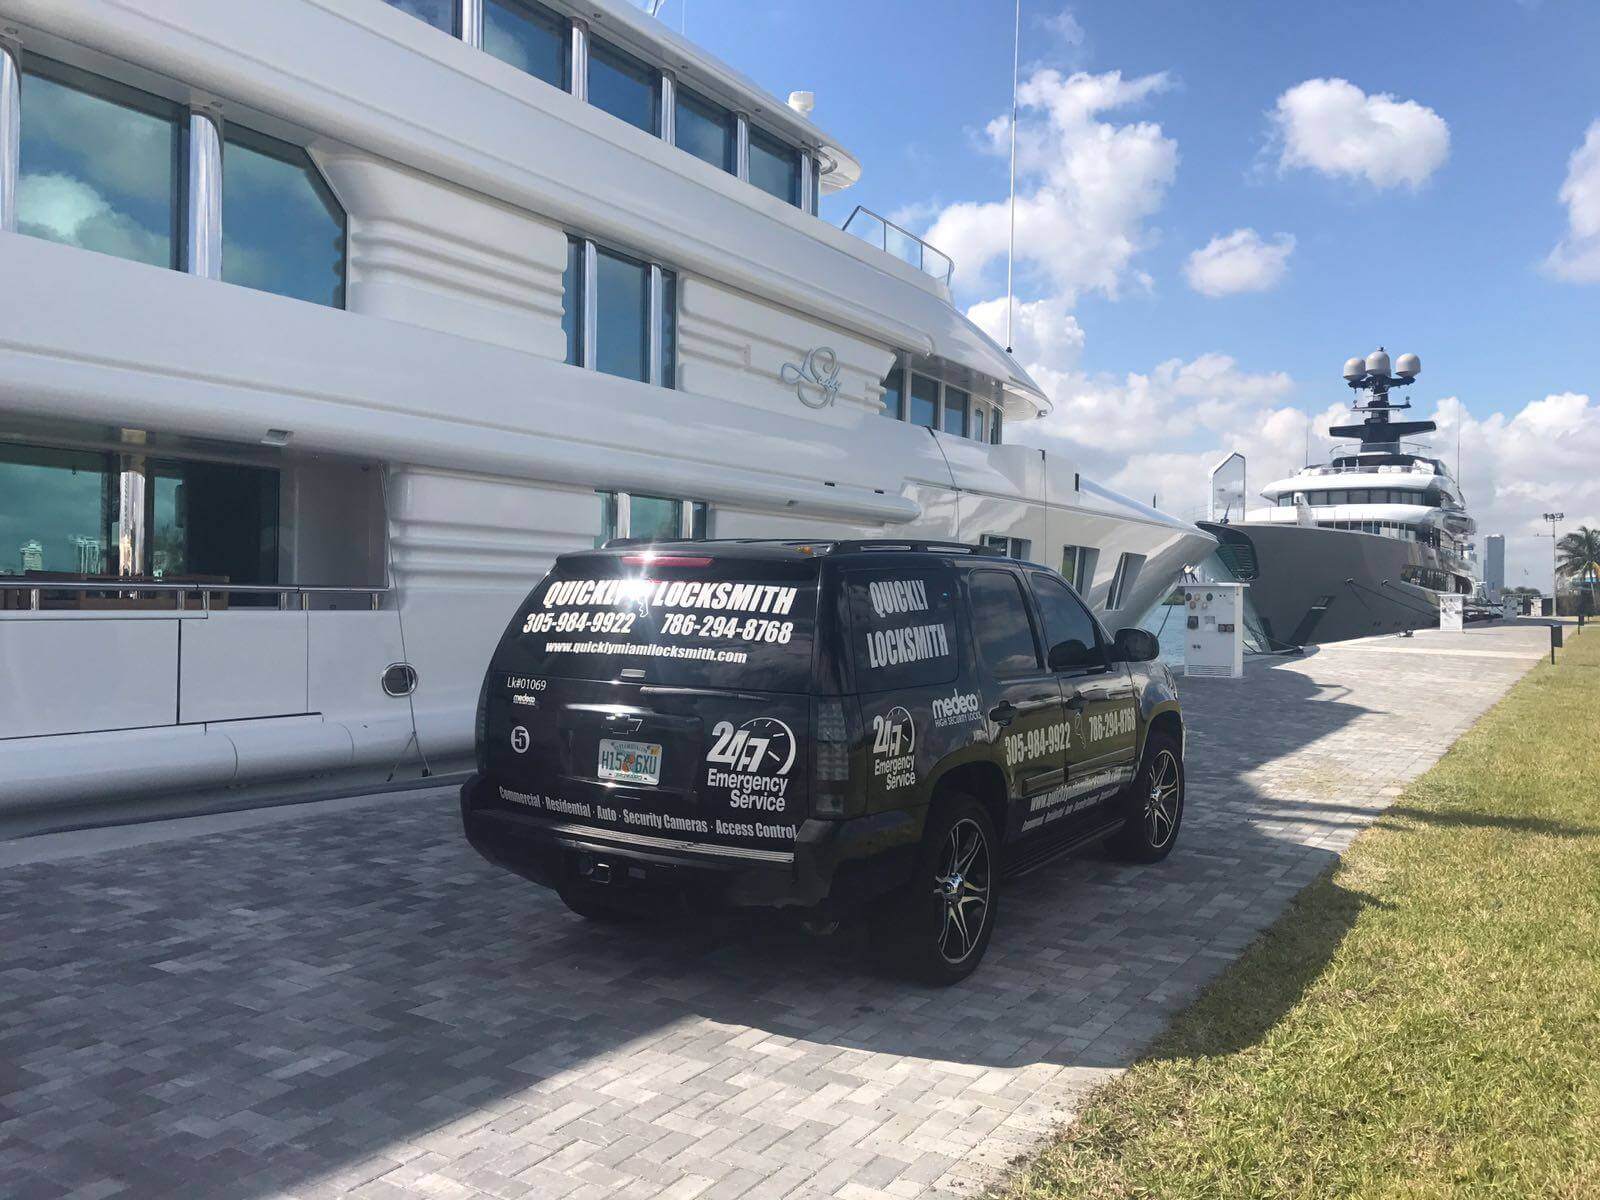 Our Mobile Locksmith Services Unit Arrives To Miami Marina To Provide Emergency Services For The Boats And The Yachts At Miami FL Harbor